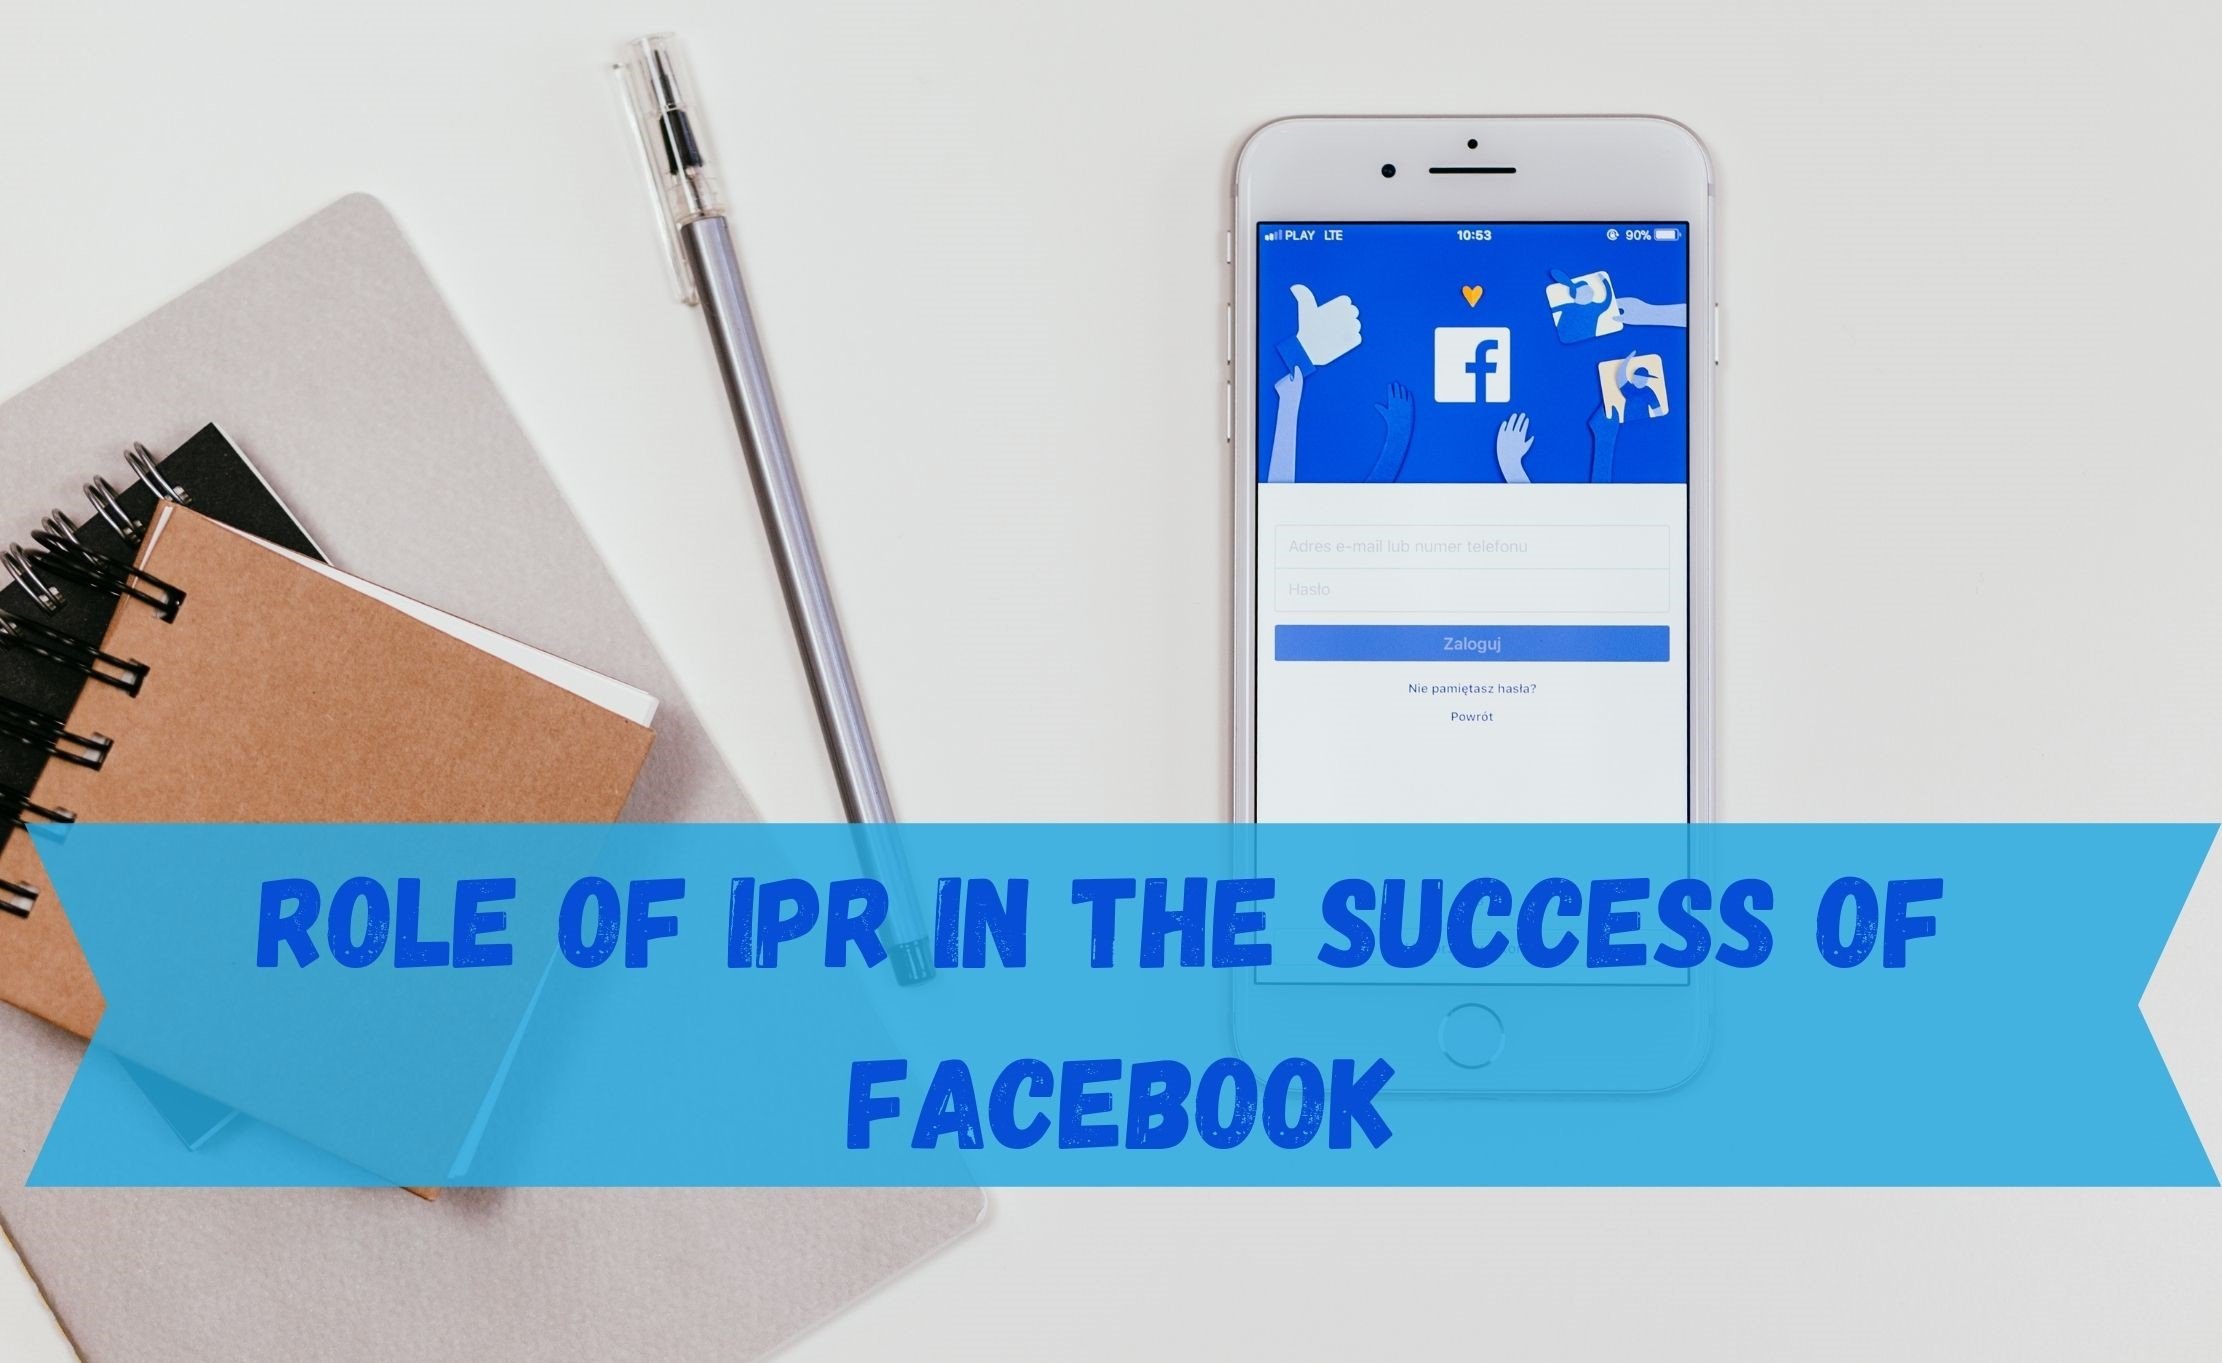 ROLE OF IPR IN THE SUCCESS OF FACEBOOK